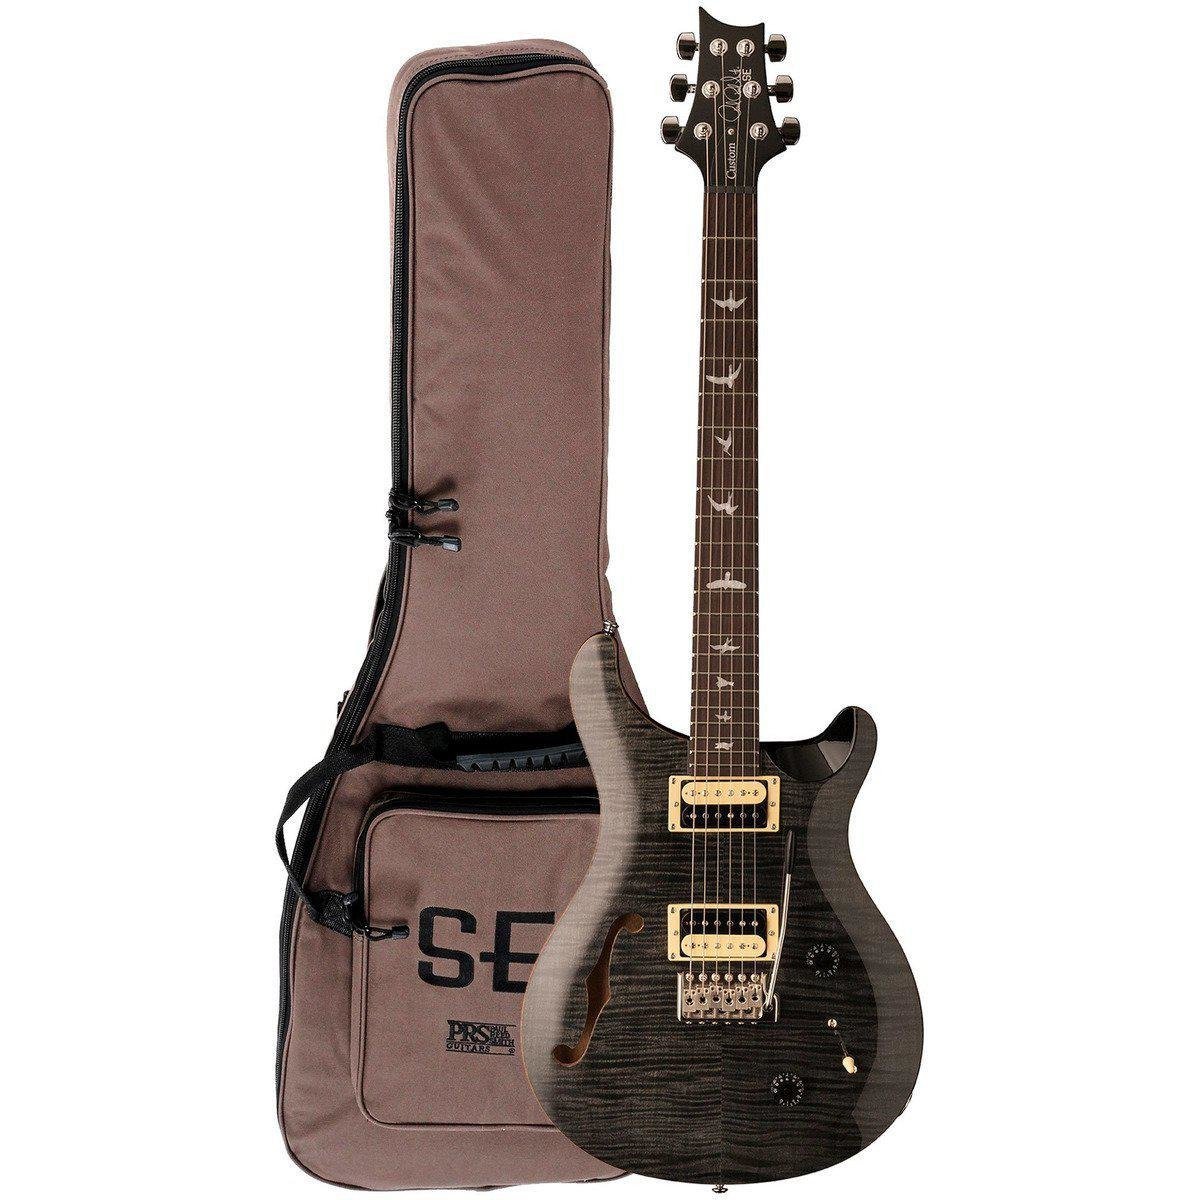 PRS SE Custom 22 Semi-Hollow Body Electric Guitar With Deluxe Bag-Andy's Music